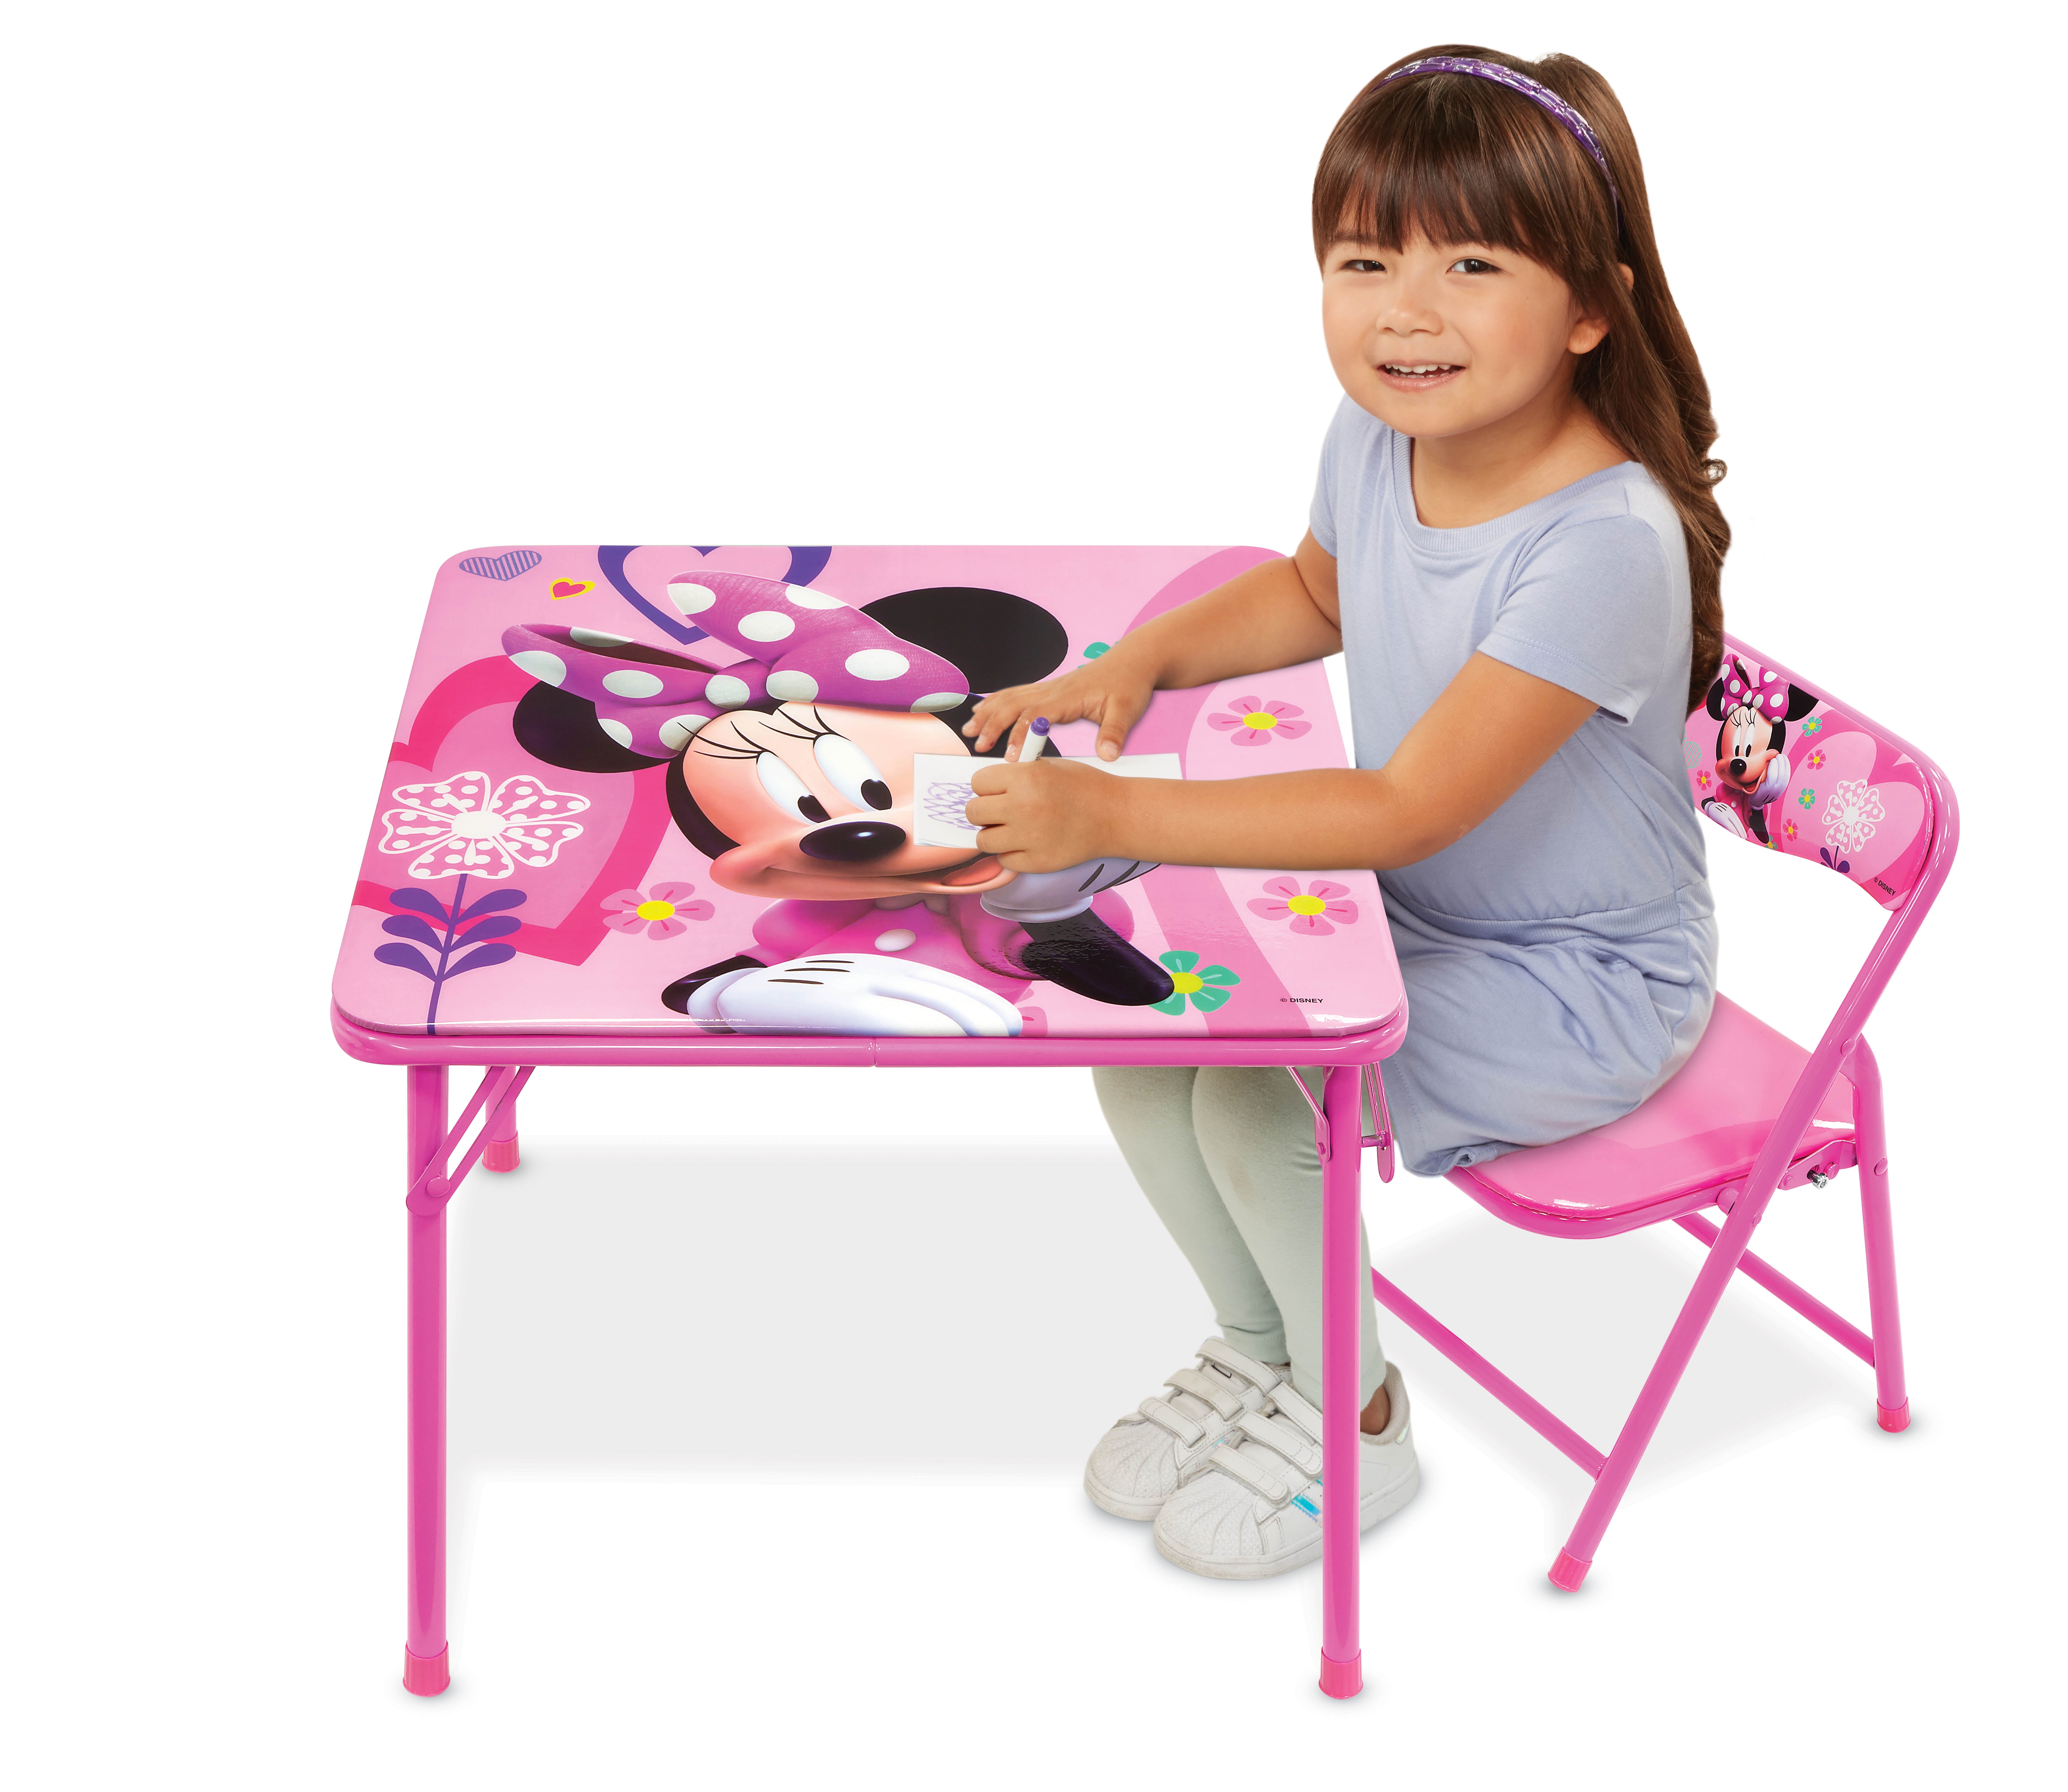 Peppa Kids School Supplies Table Desk And Chair With Storage Bin Set For Girls 